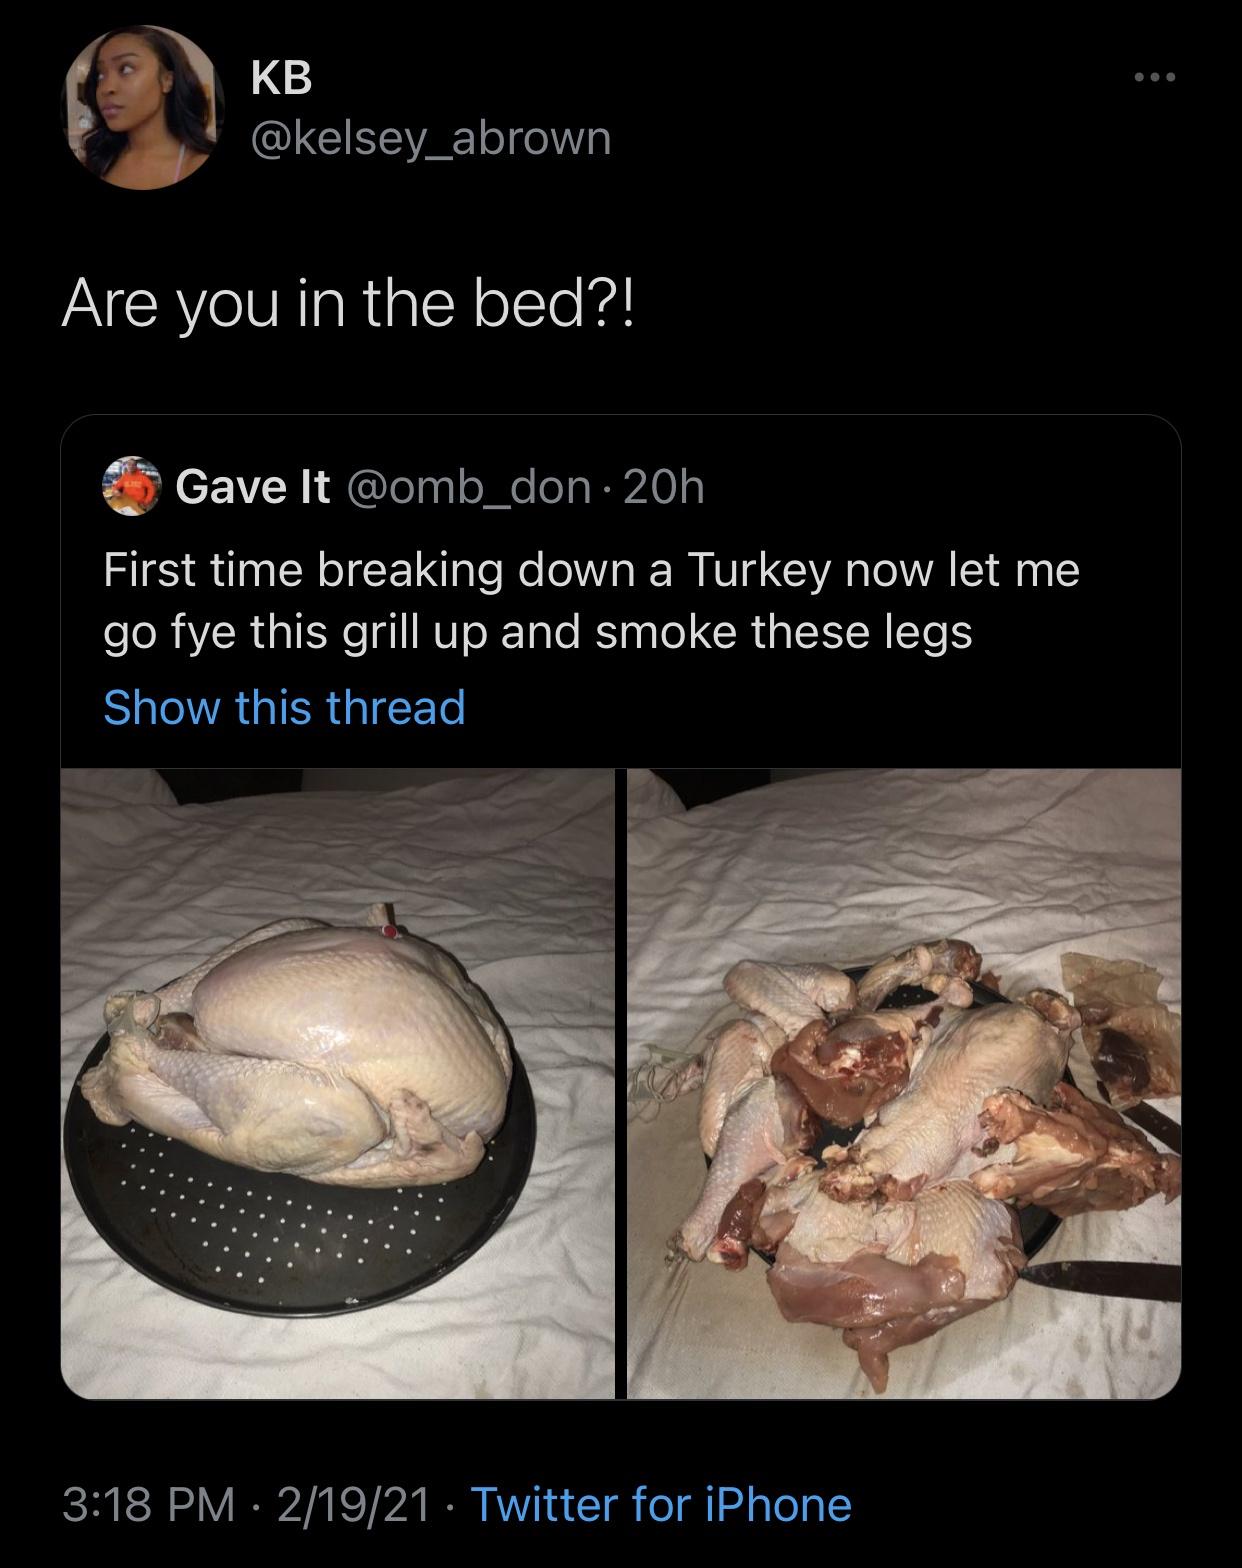 human - Kb Are you in the bed?! Gave It 20h First time breaking down a Turkey now let me go fye this grill up and smoke these legs Show this thread 21921 Twitter for iPhone